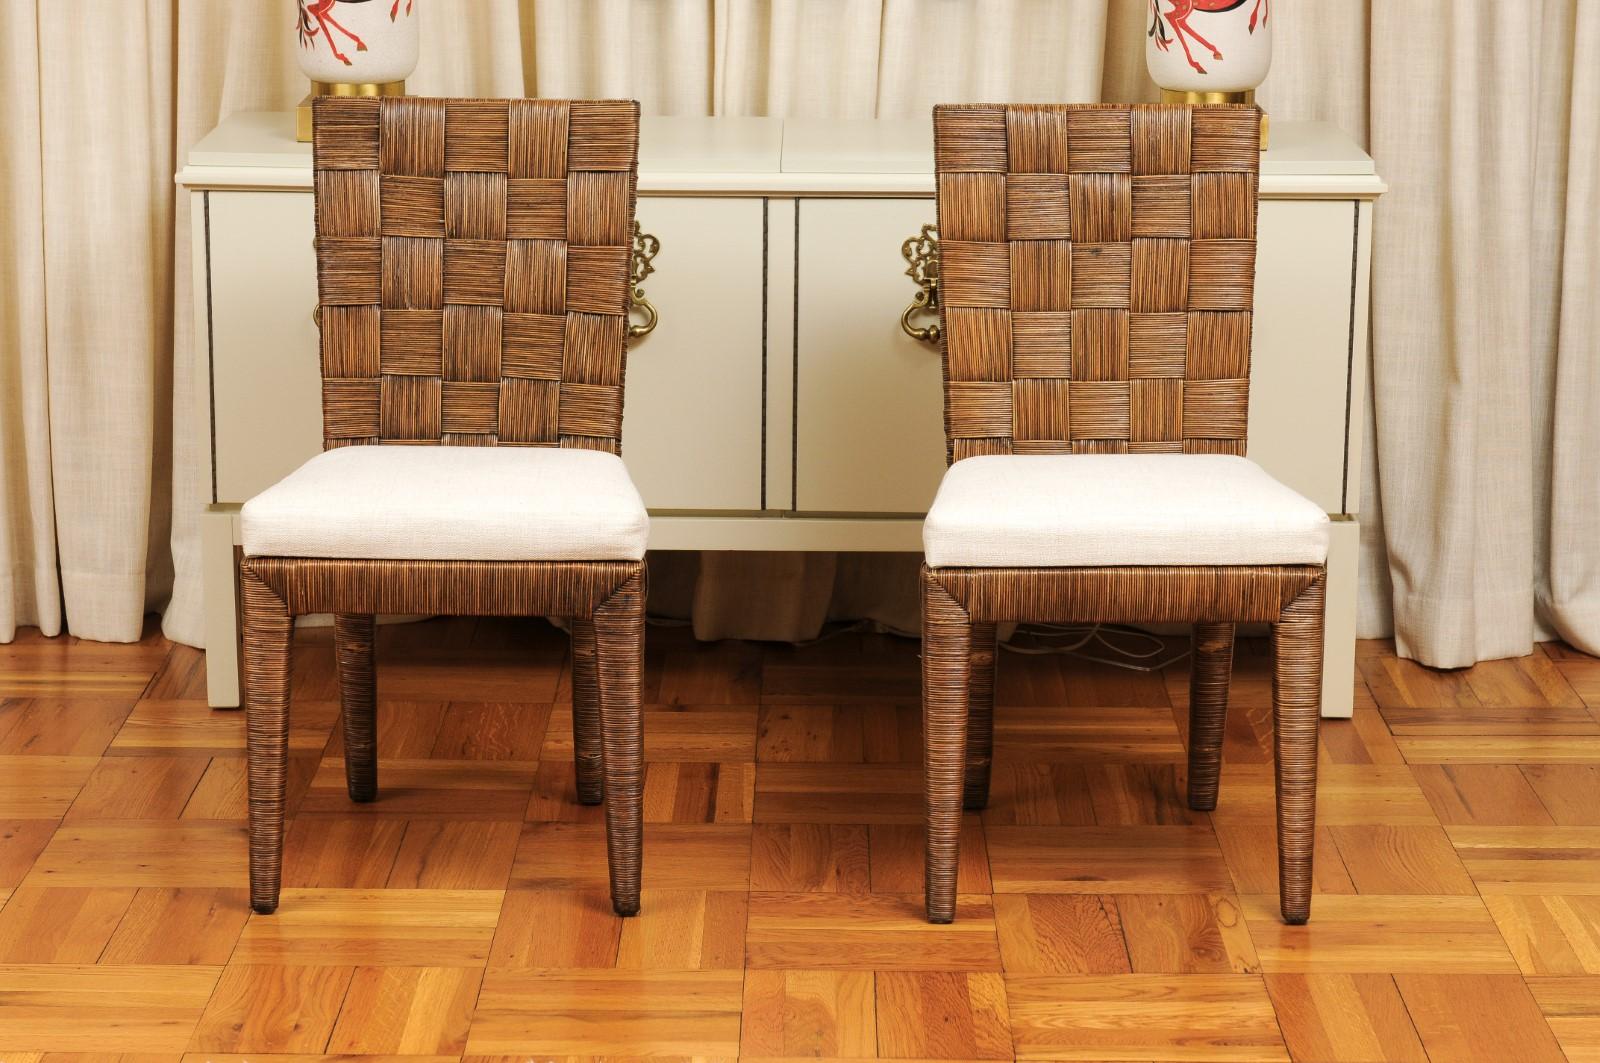 Stellar Set of 12 Vintage Block Island Cane Chairs by John Hutton for Donghia For Sale 2